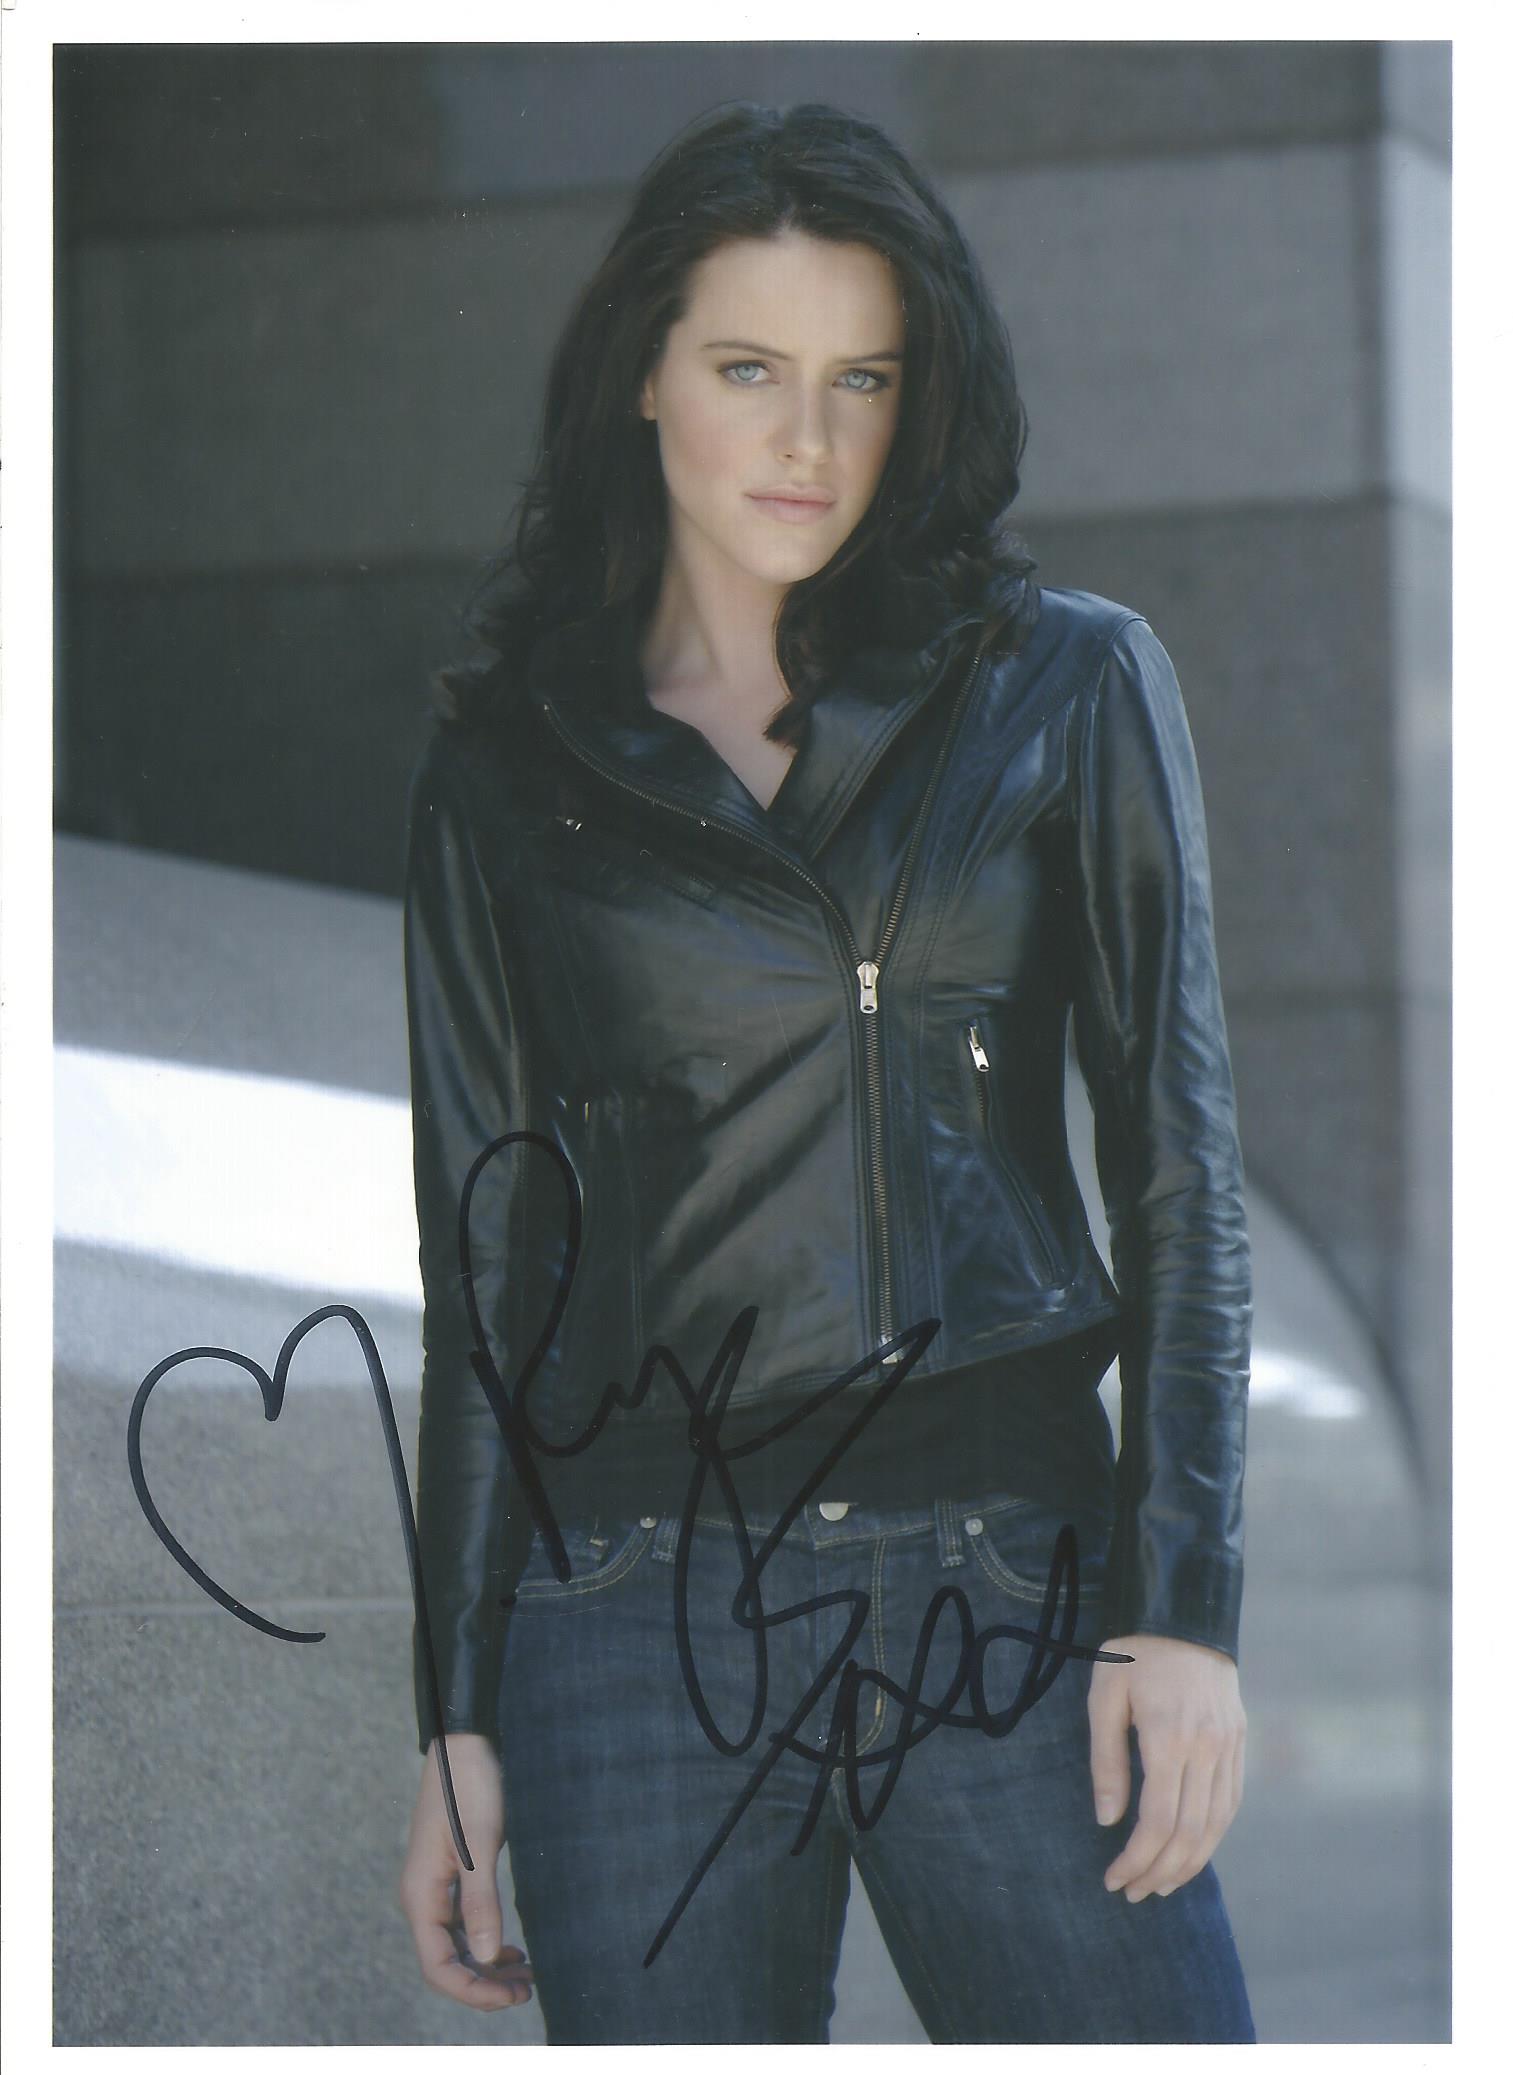 Michelle Ryan signed 8x6 colour photograph. Ryan is an English actress who was known for her roles